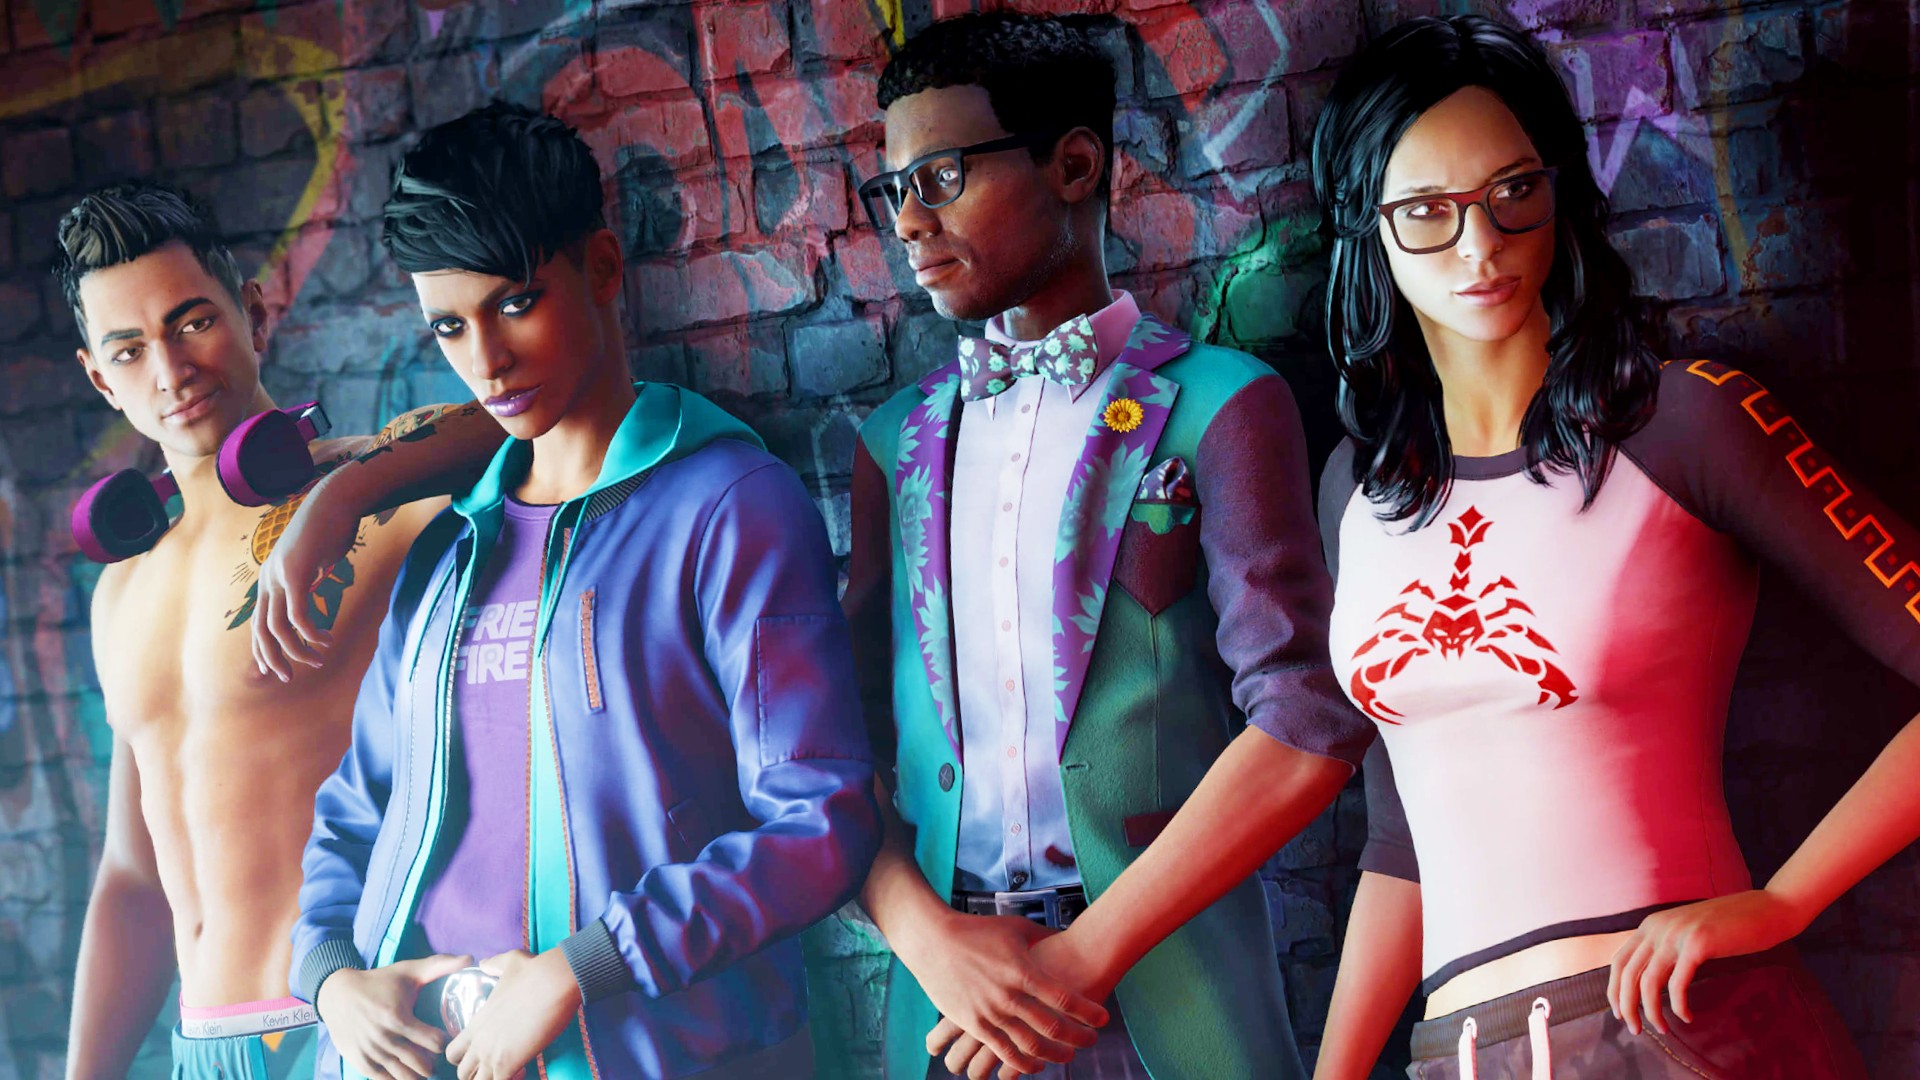 Saints Row cast: all characters and voice actors